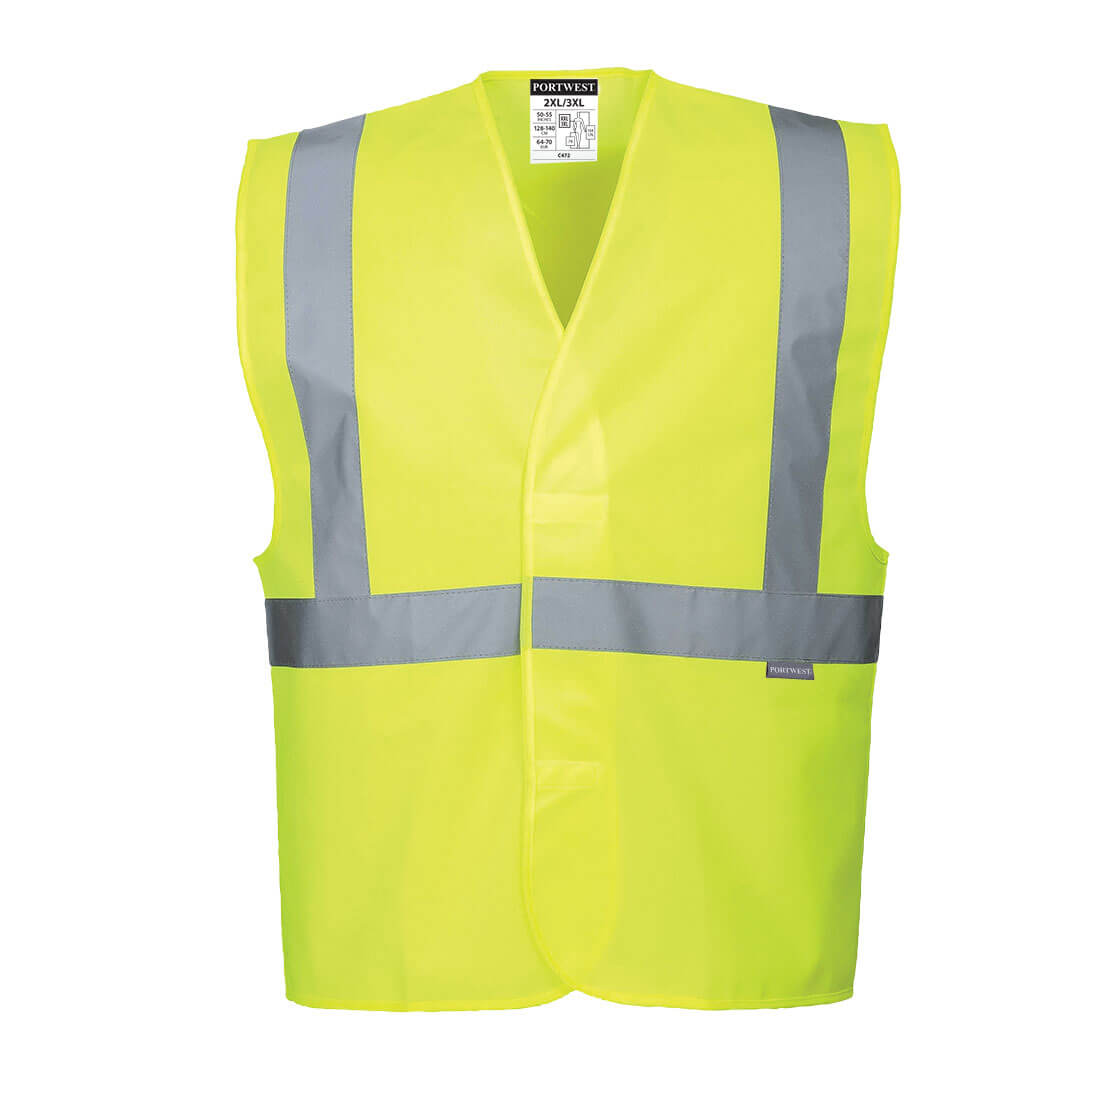 Image of Portwest One Band and Brace Class 2 Hi Vis Vest Yellow 4XL / 5XL